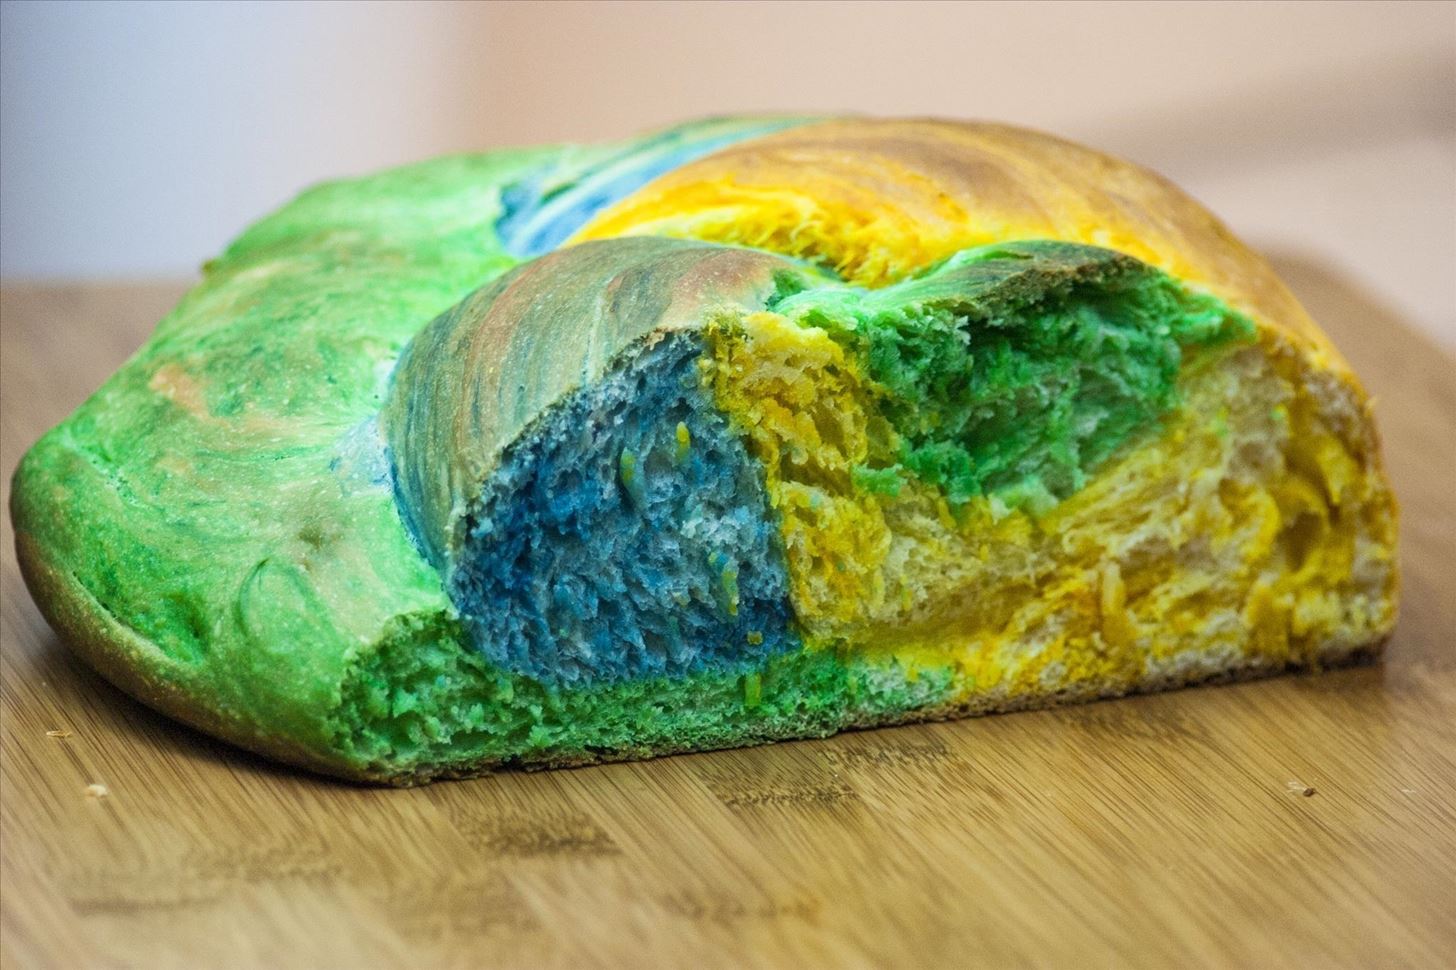 How to Make Super Colorful Bread for One-of-a-Kind Ice Cream Sandwiches